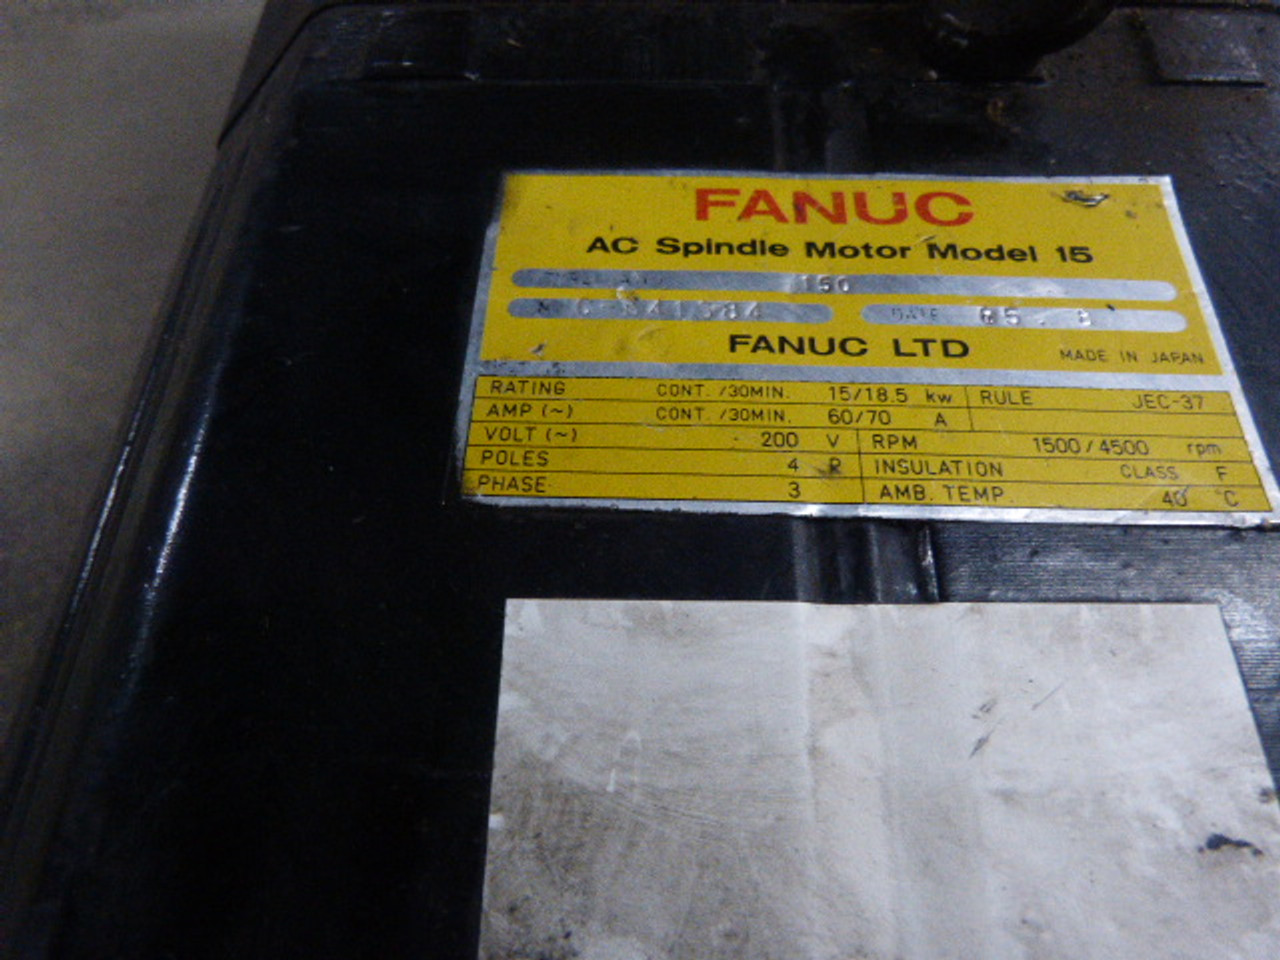 Fanuc AC Spindle Motor 15/18.5kW 1500/4500RPM 200V 3Ph 60/70A USED